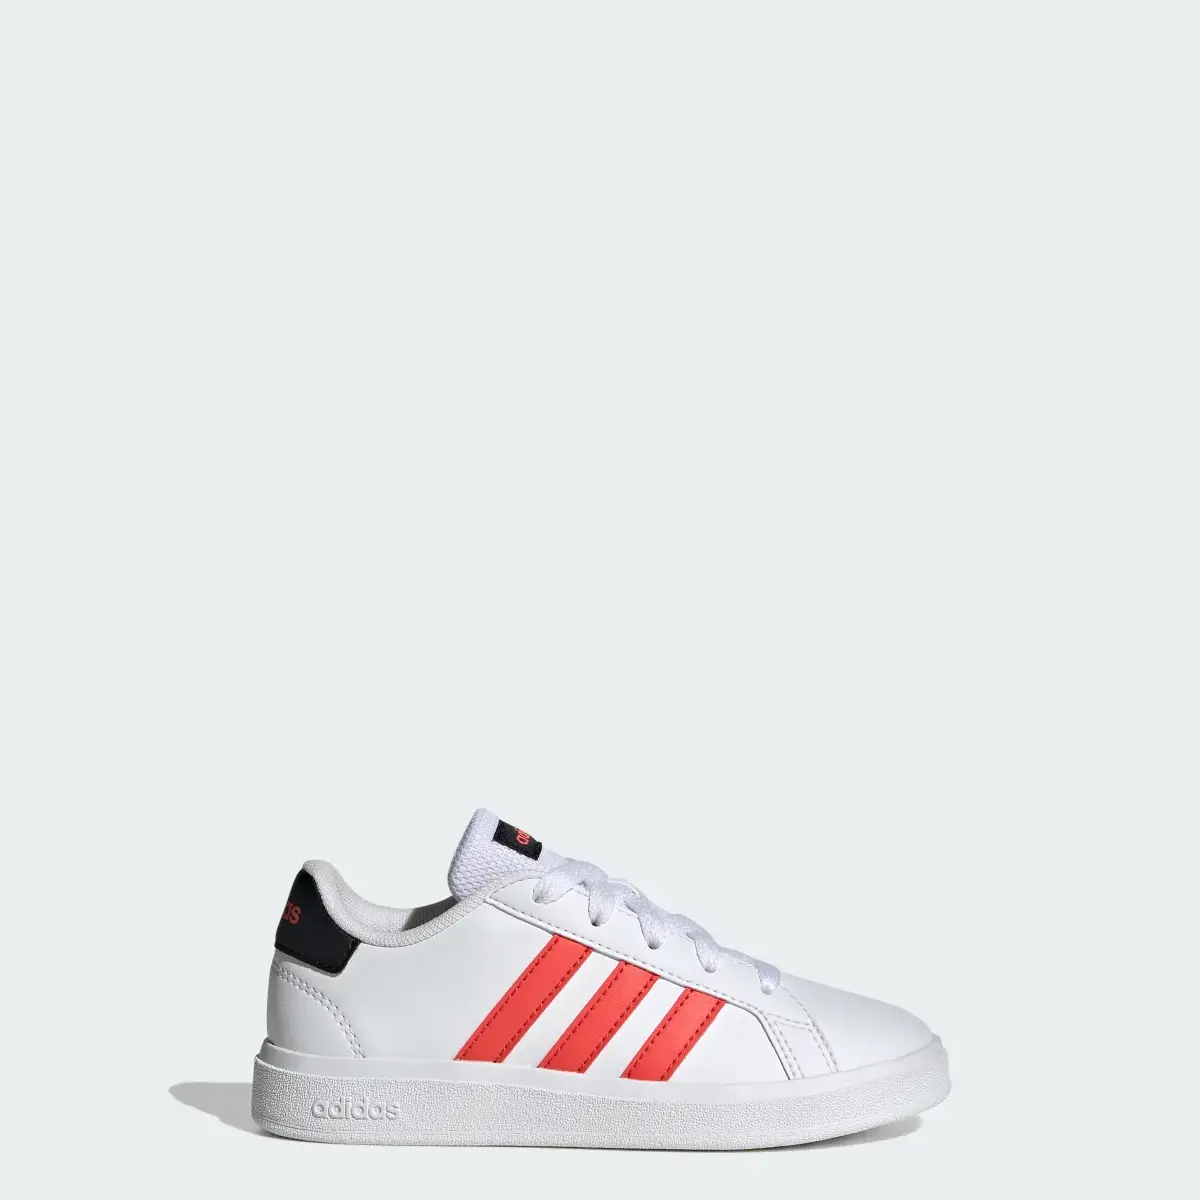 Adidas Grand Court Lifestyle Tennis Lace-Up Schuh. 1